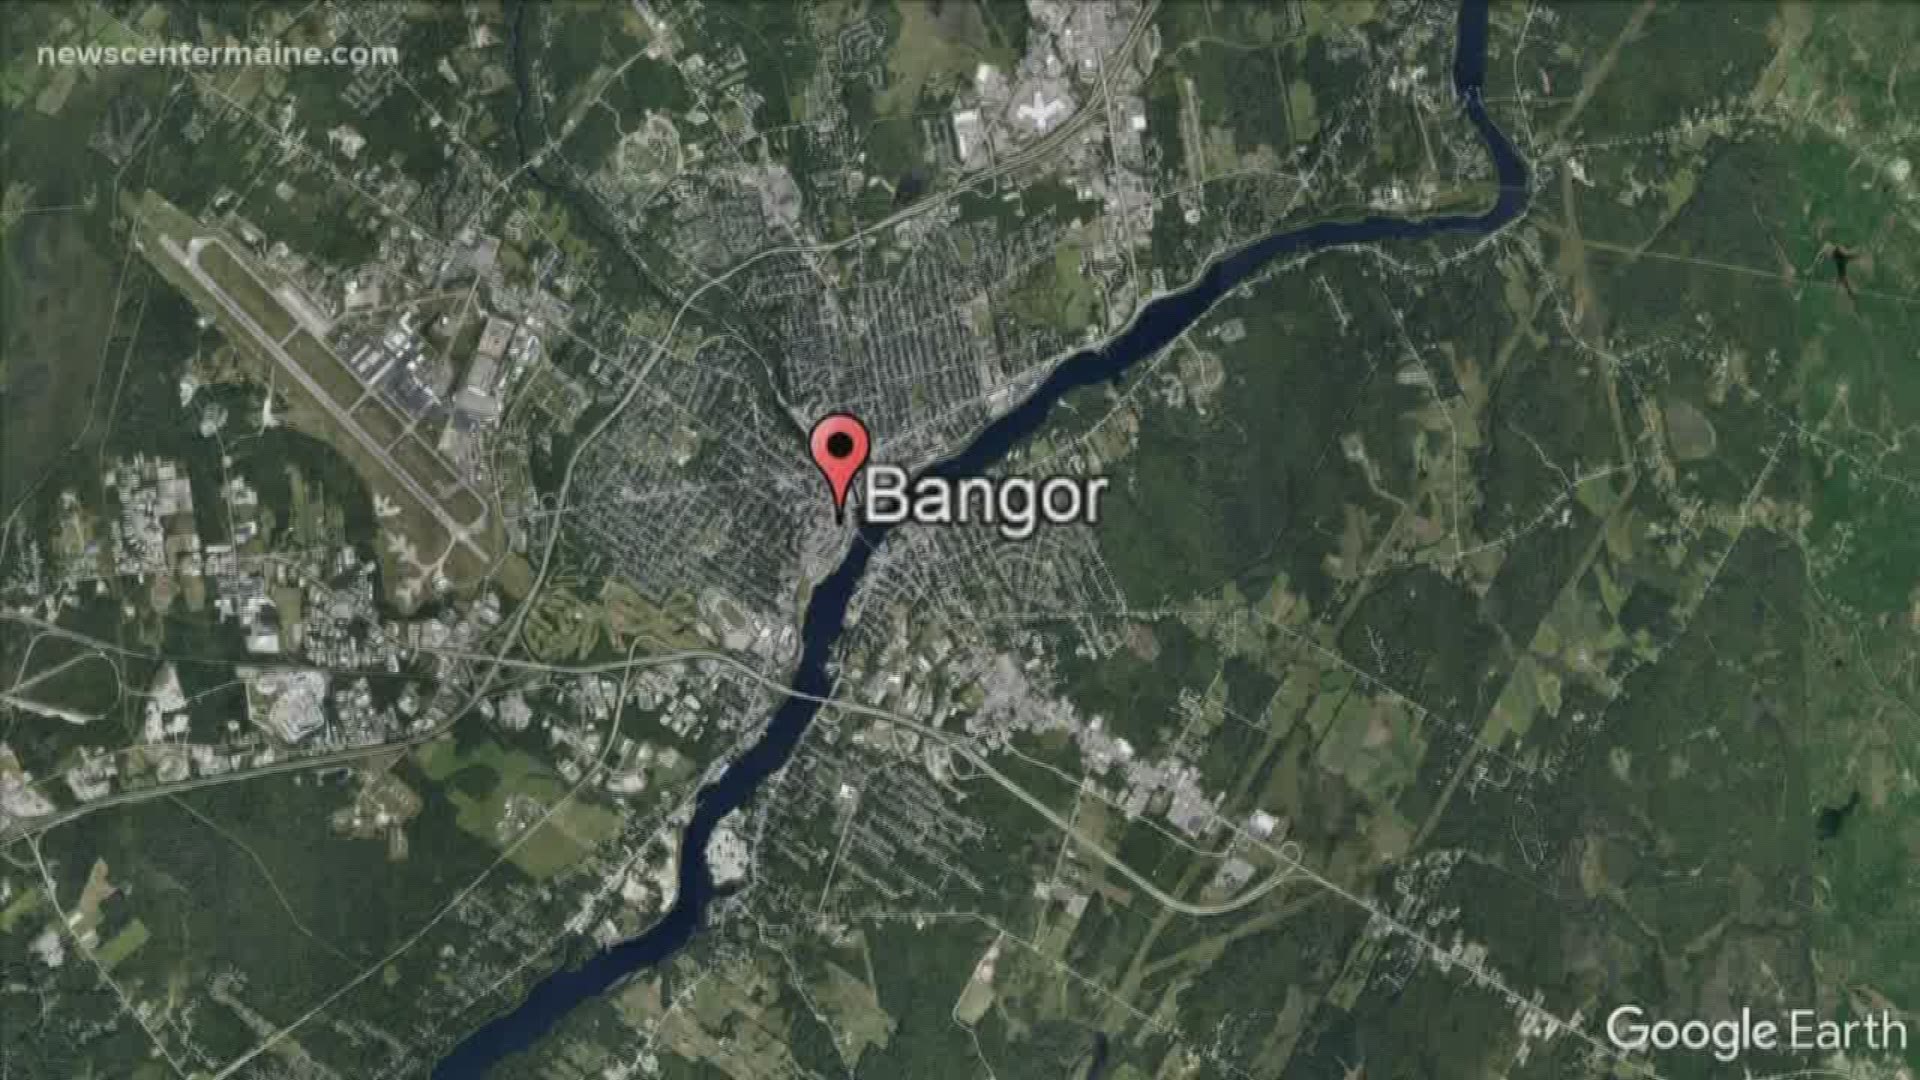 Bangor police are investigating reports of gunshots at or near a house on 2nd Street. It happened just before 9 p.m. Thursday night.